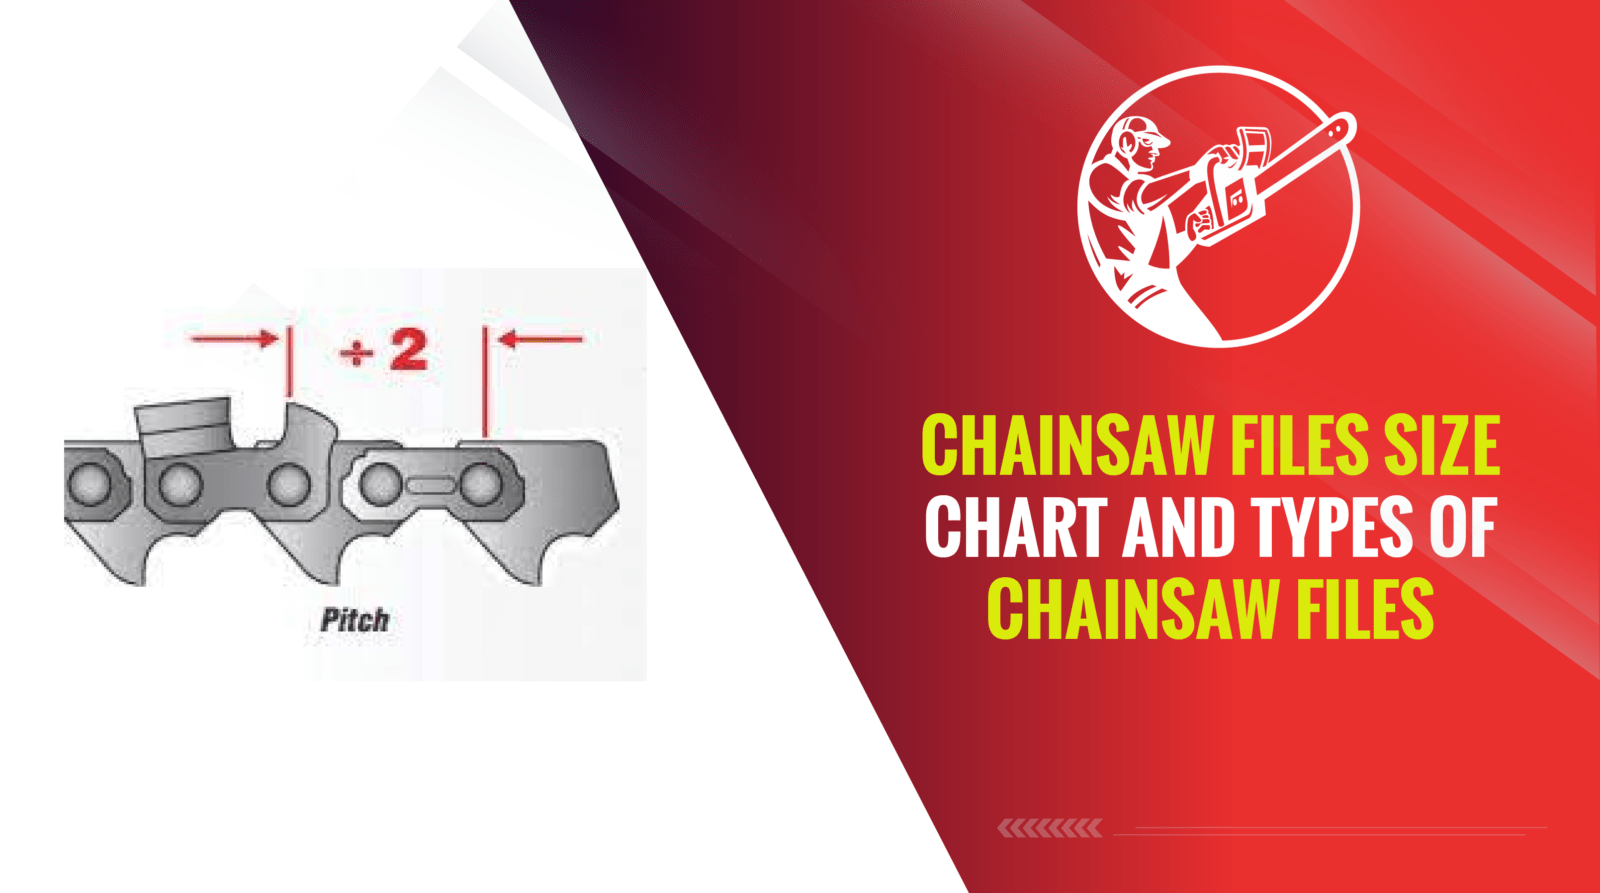 Chainsaw Files Size Chart and Types of Chainsaw Files